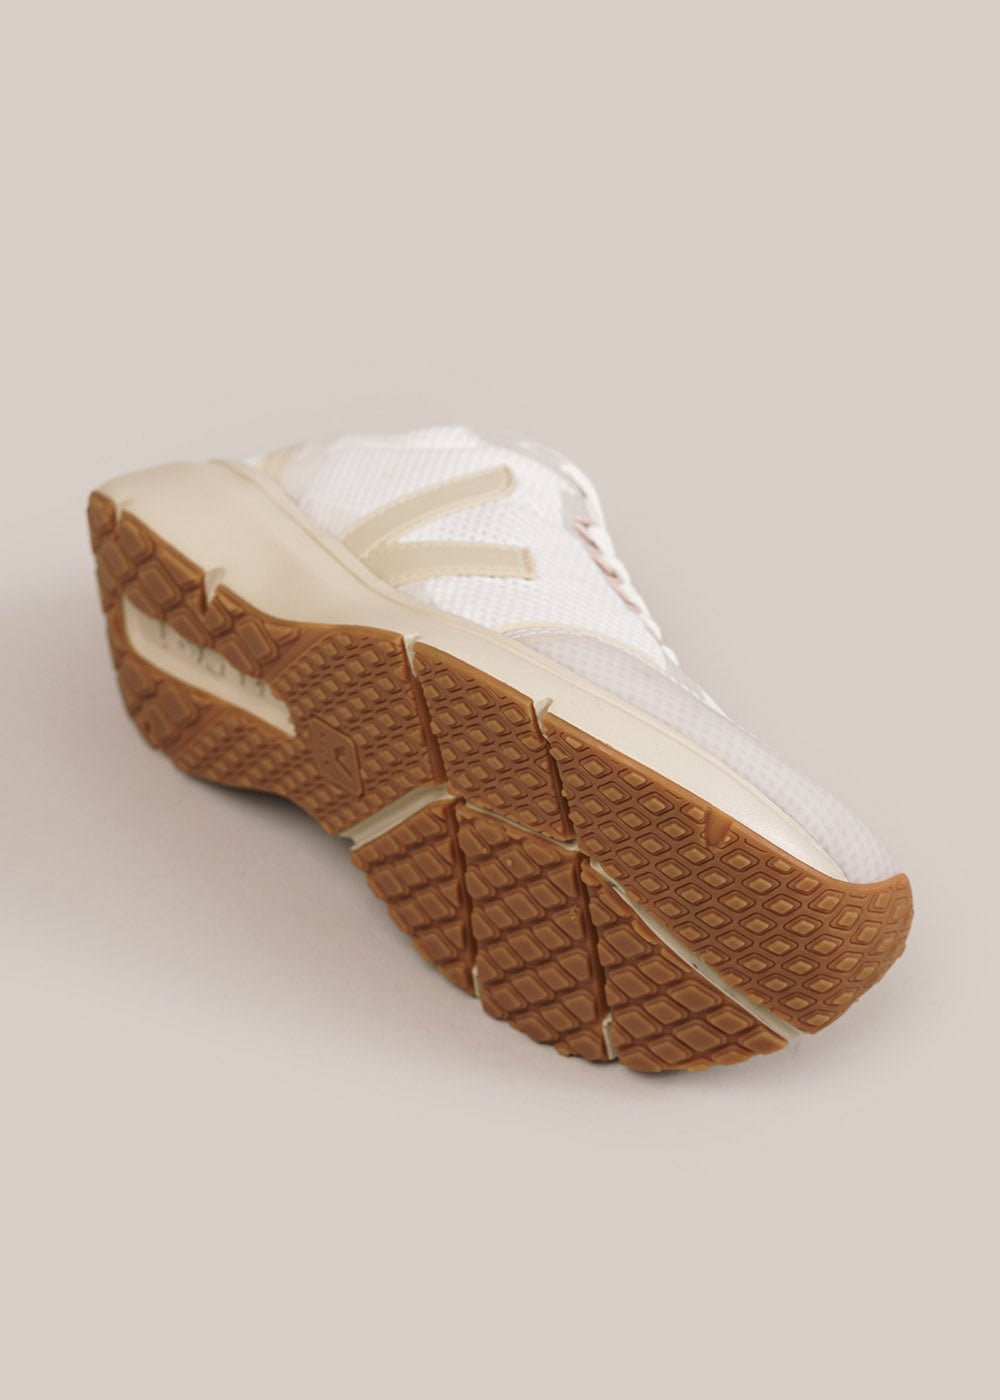 Veja White Pierre Condor 2 Runners - New Classics Studios Sustainable Ethical Fashion Canada